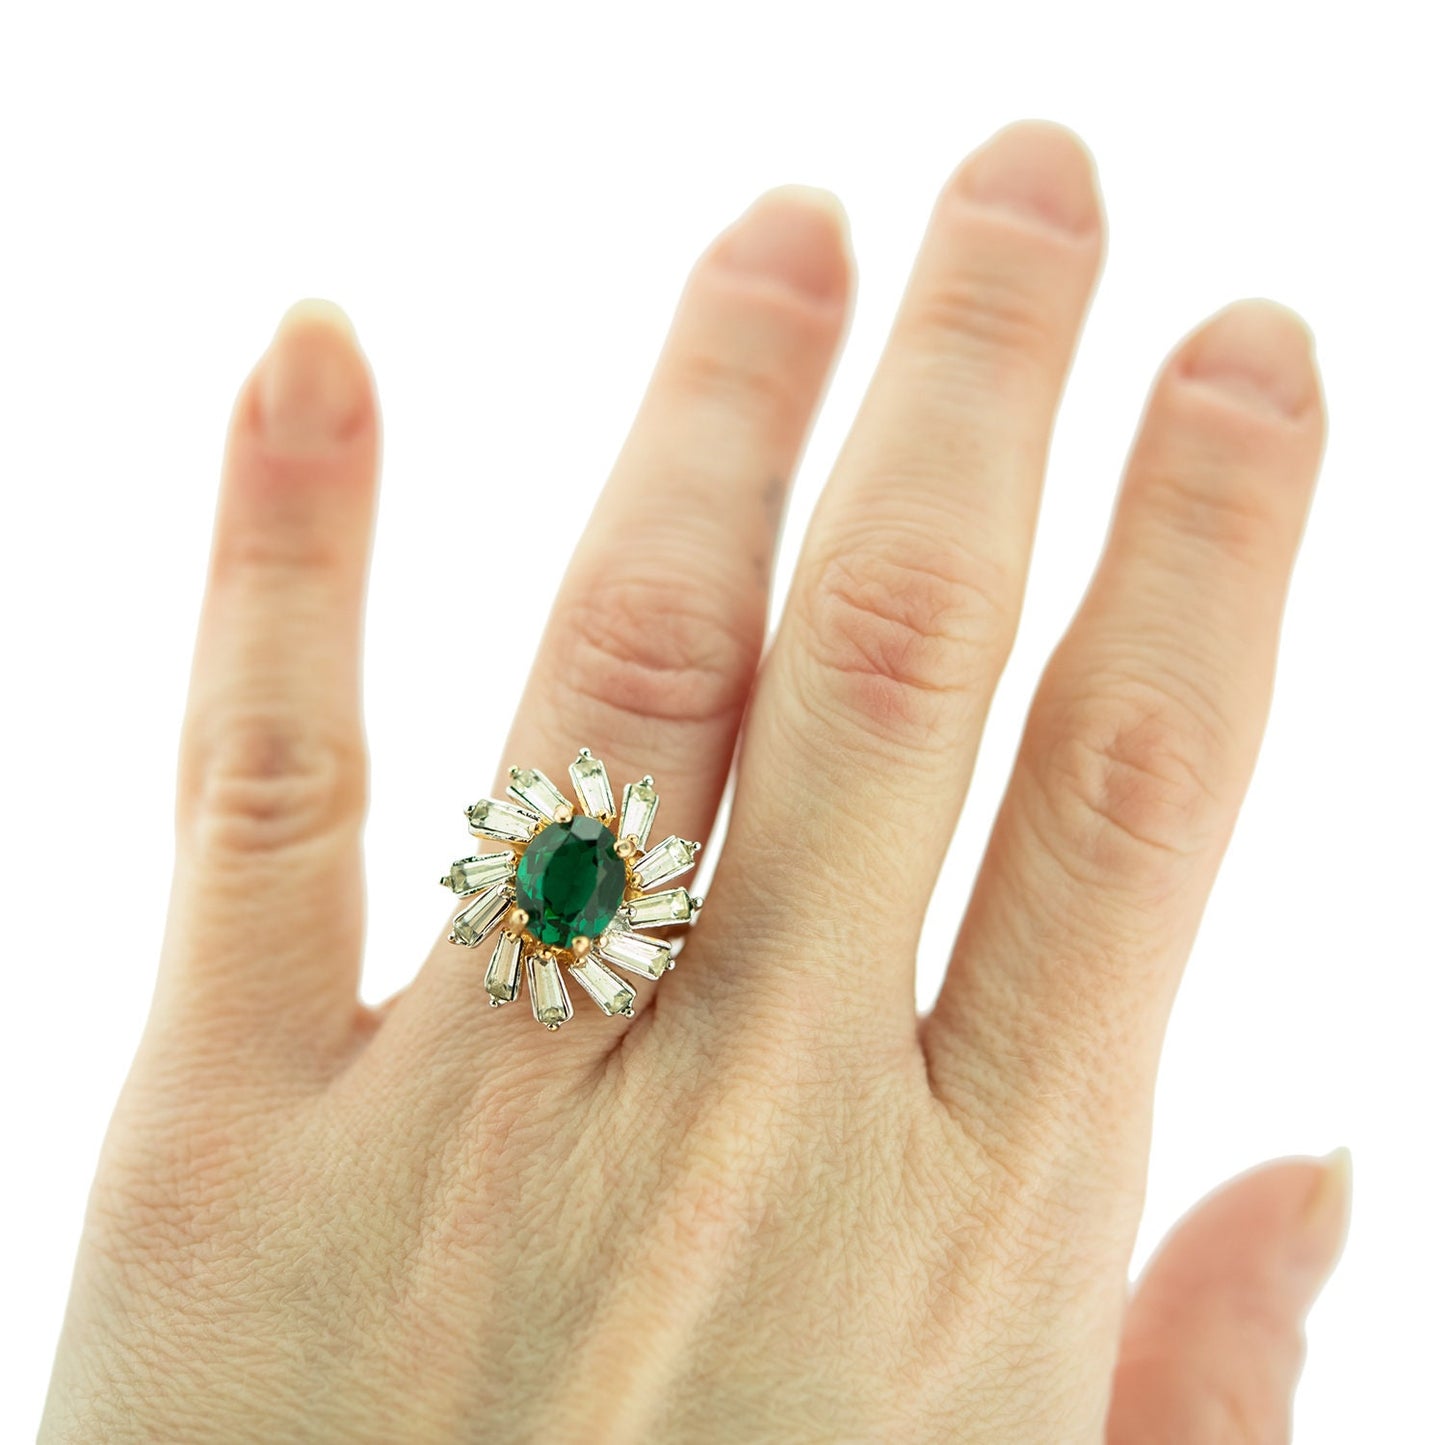 Vintage Ring Emerald and Clear Swarovski Crystal Cocktail Ring 18k Gold Made in the USA R1972-EY - Limited Stock - Never Worn